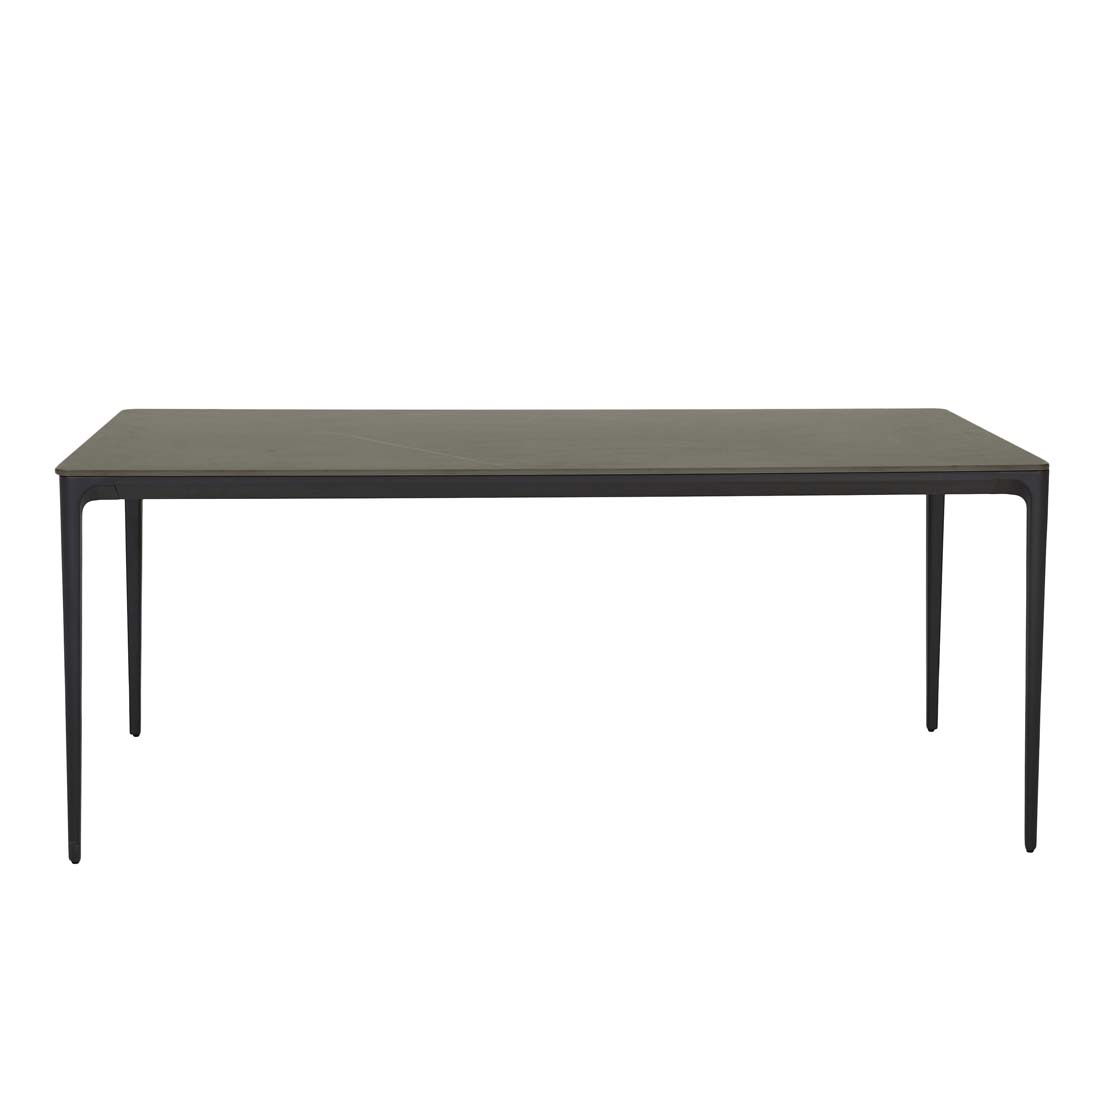 Portsea Classic Dining Tables image 11